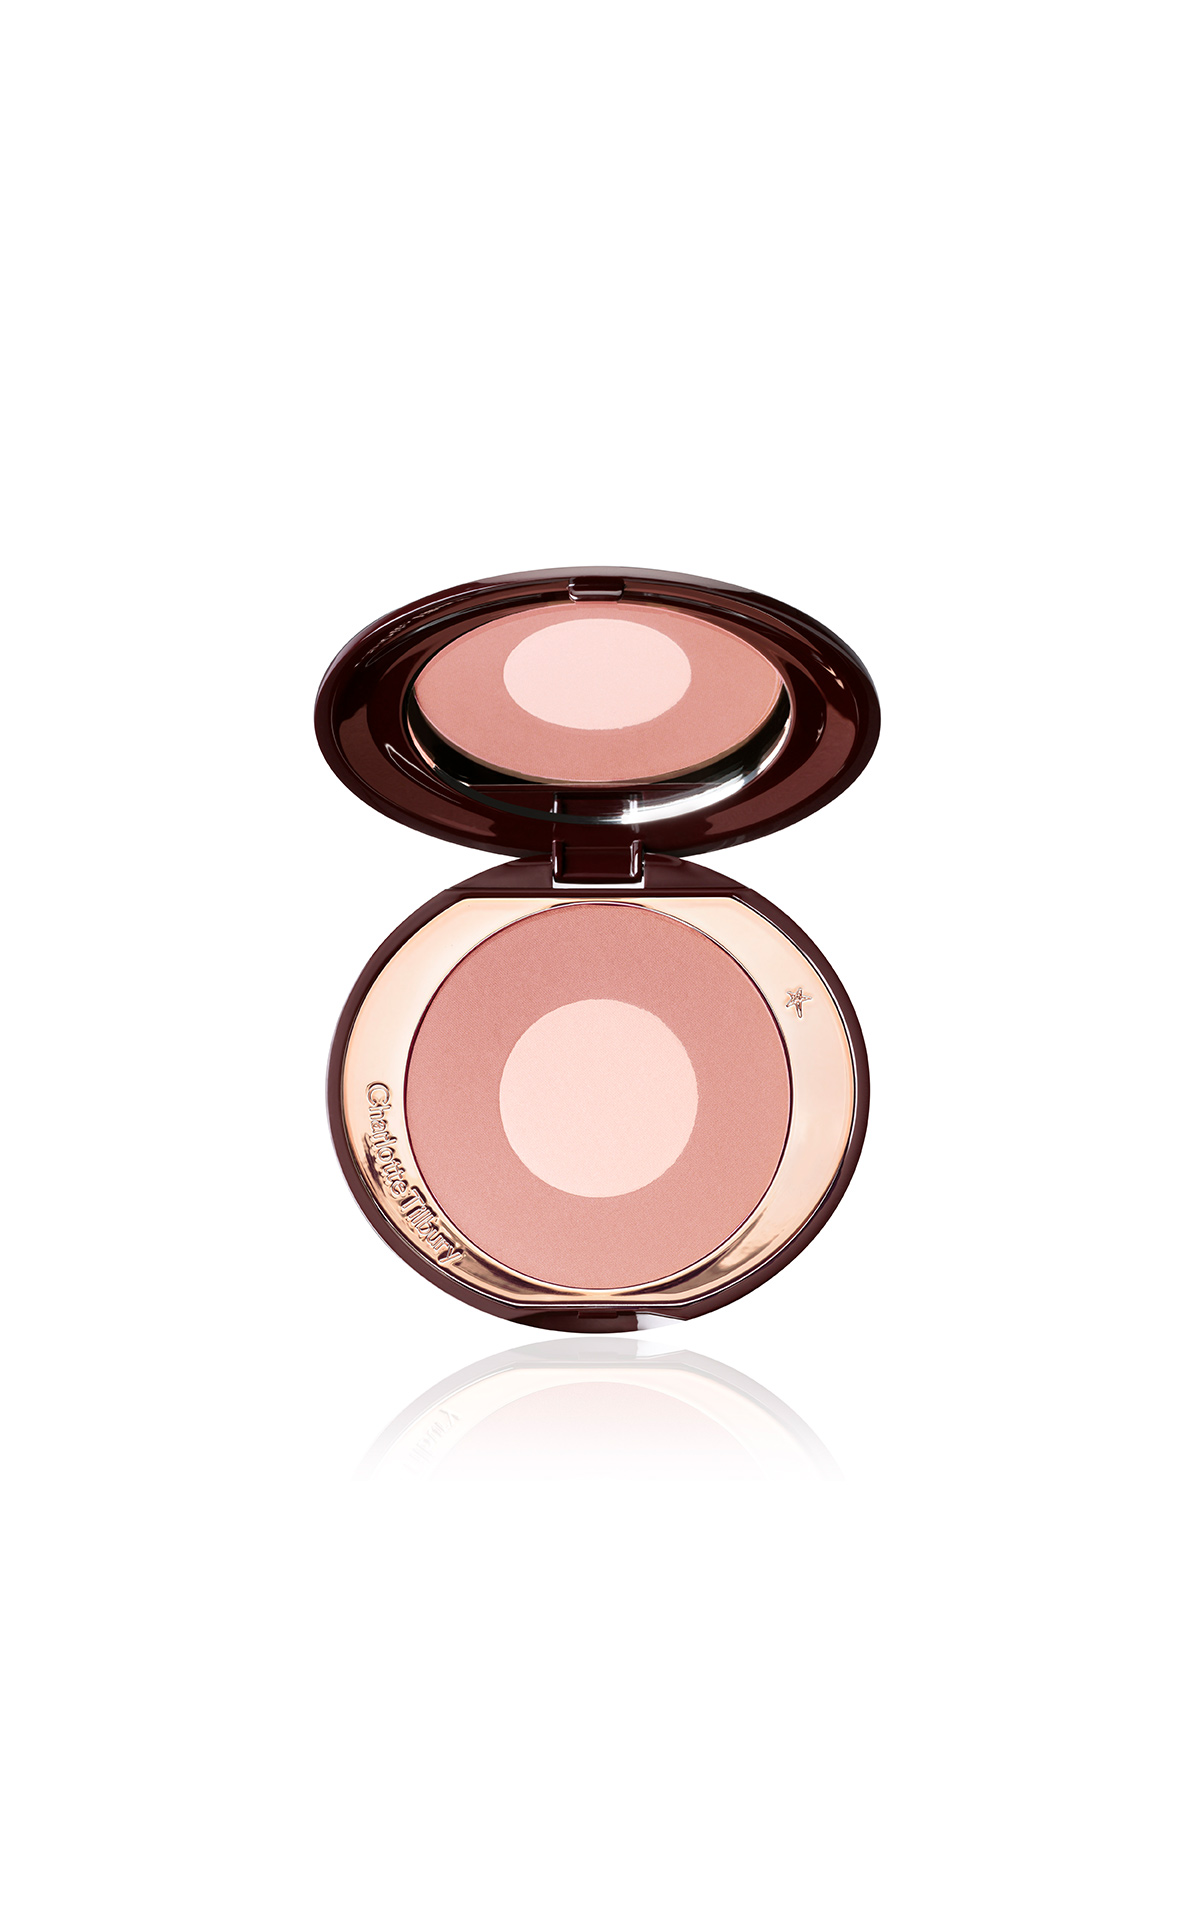 Charlotte Tilbury Cheek to chic pillow talk from Bicester Village